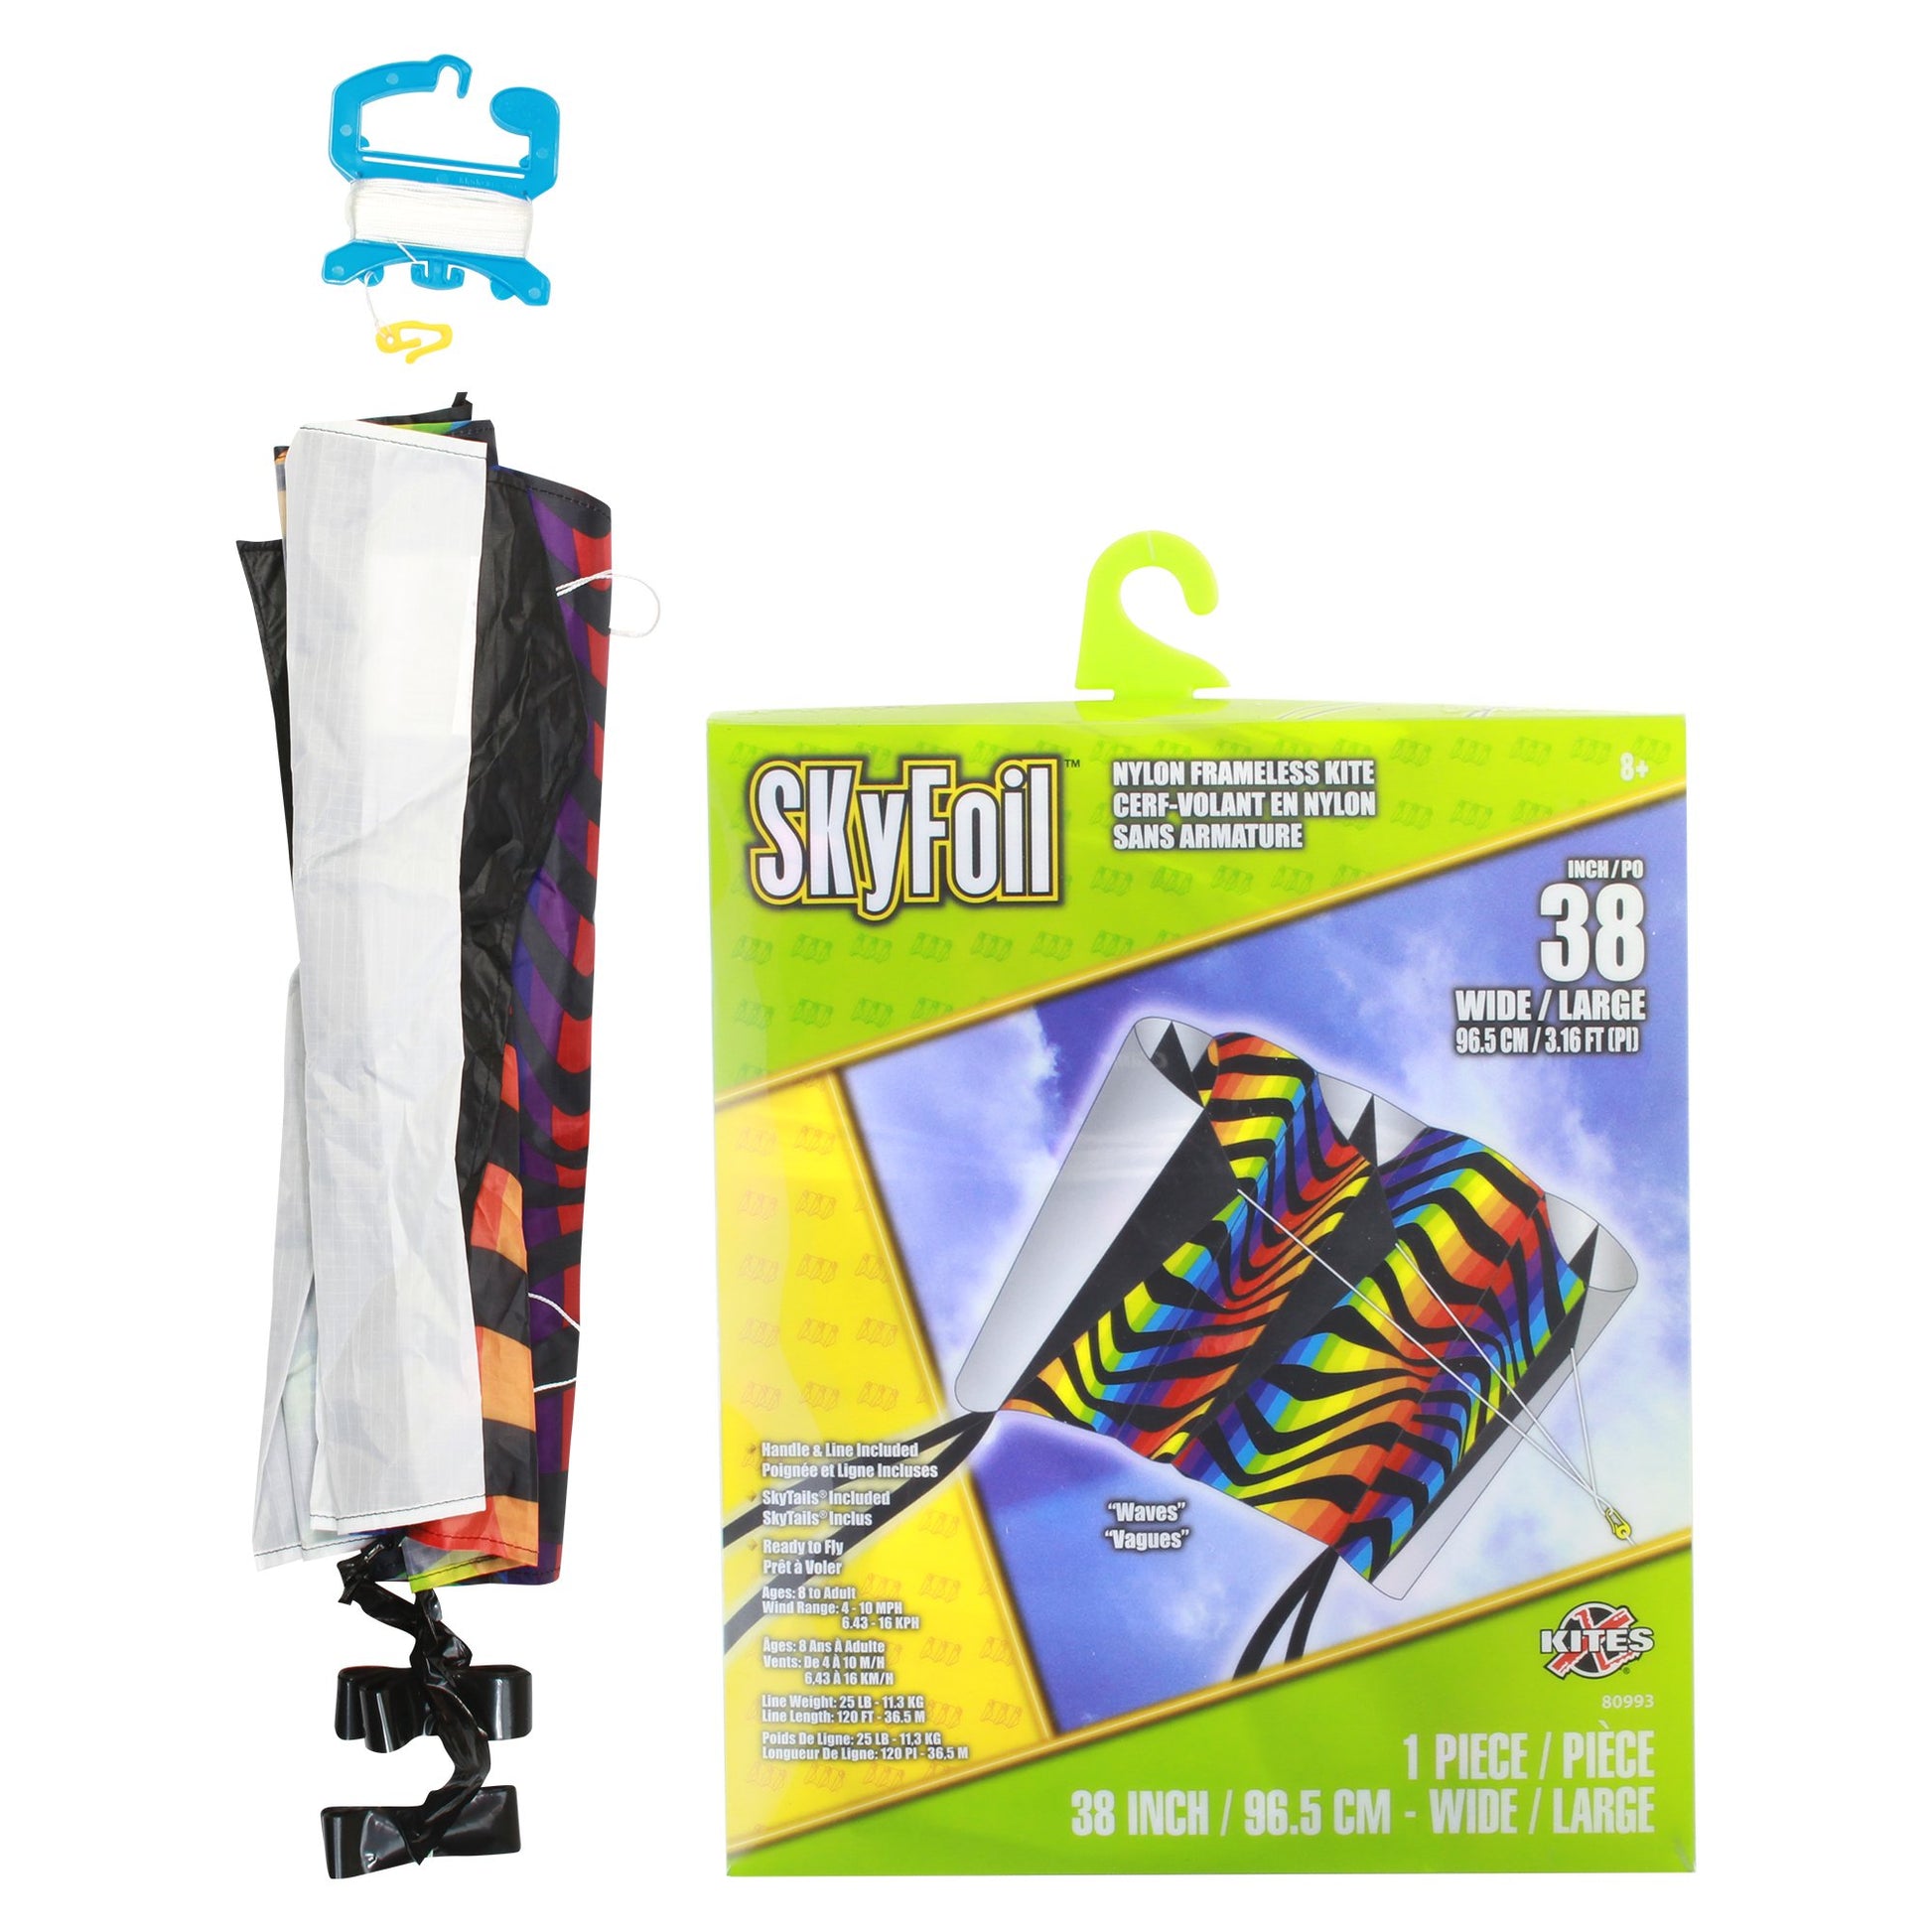 X Kites SkyFoil Waves Nylon Kite packaging and contents